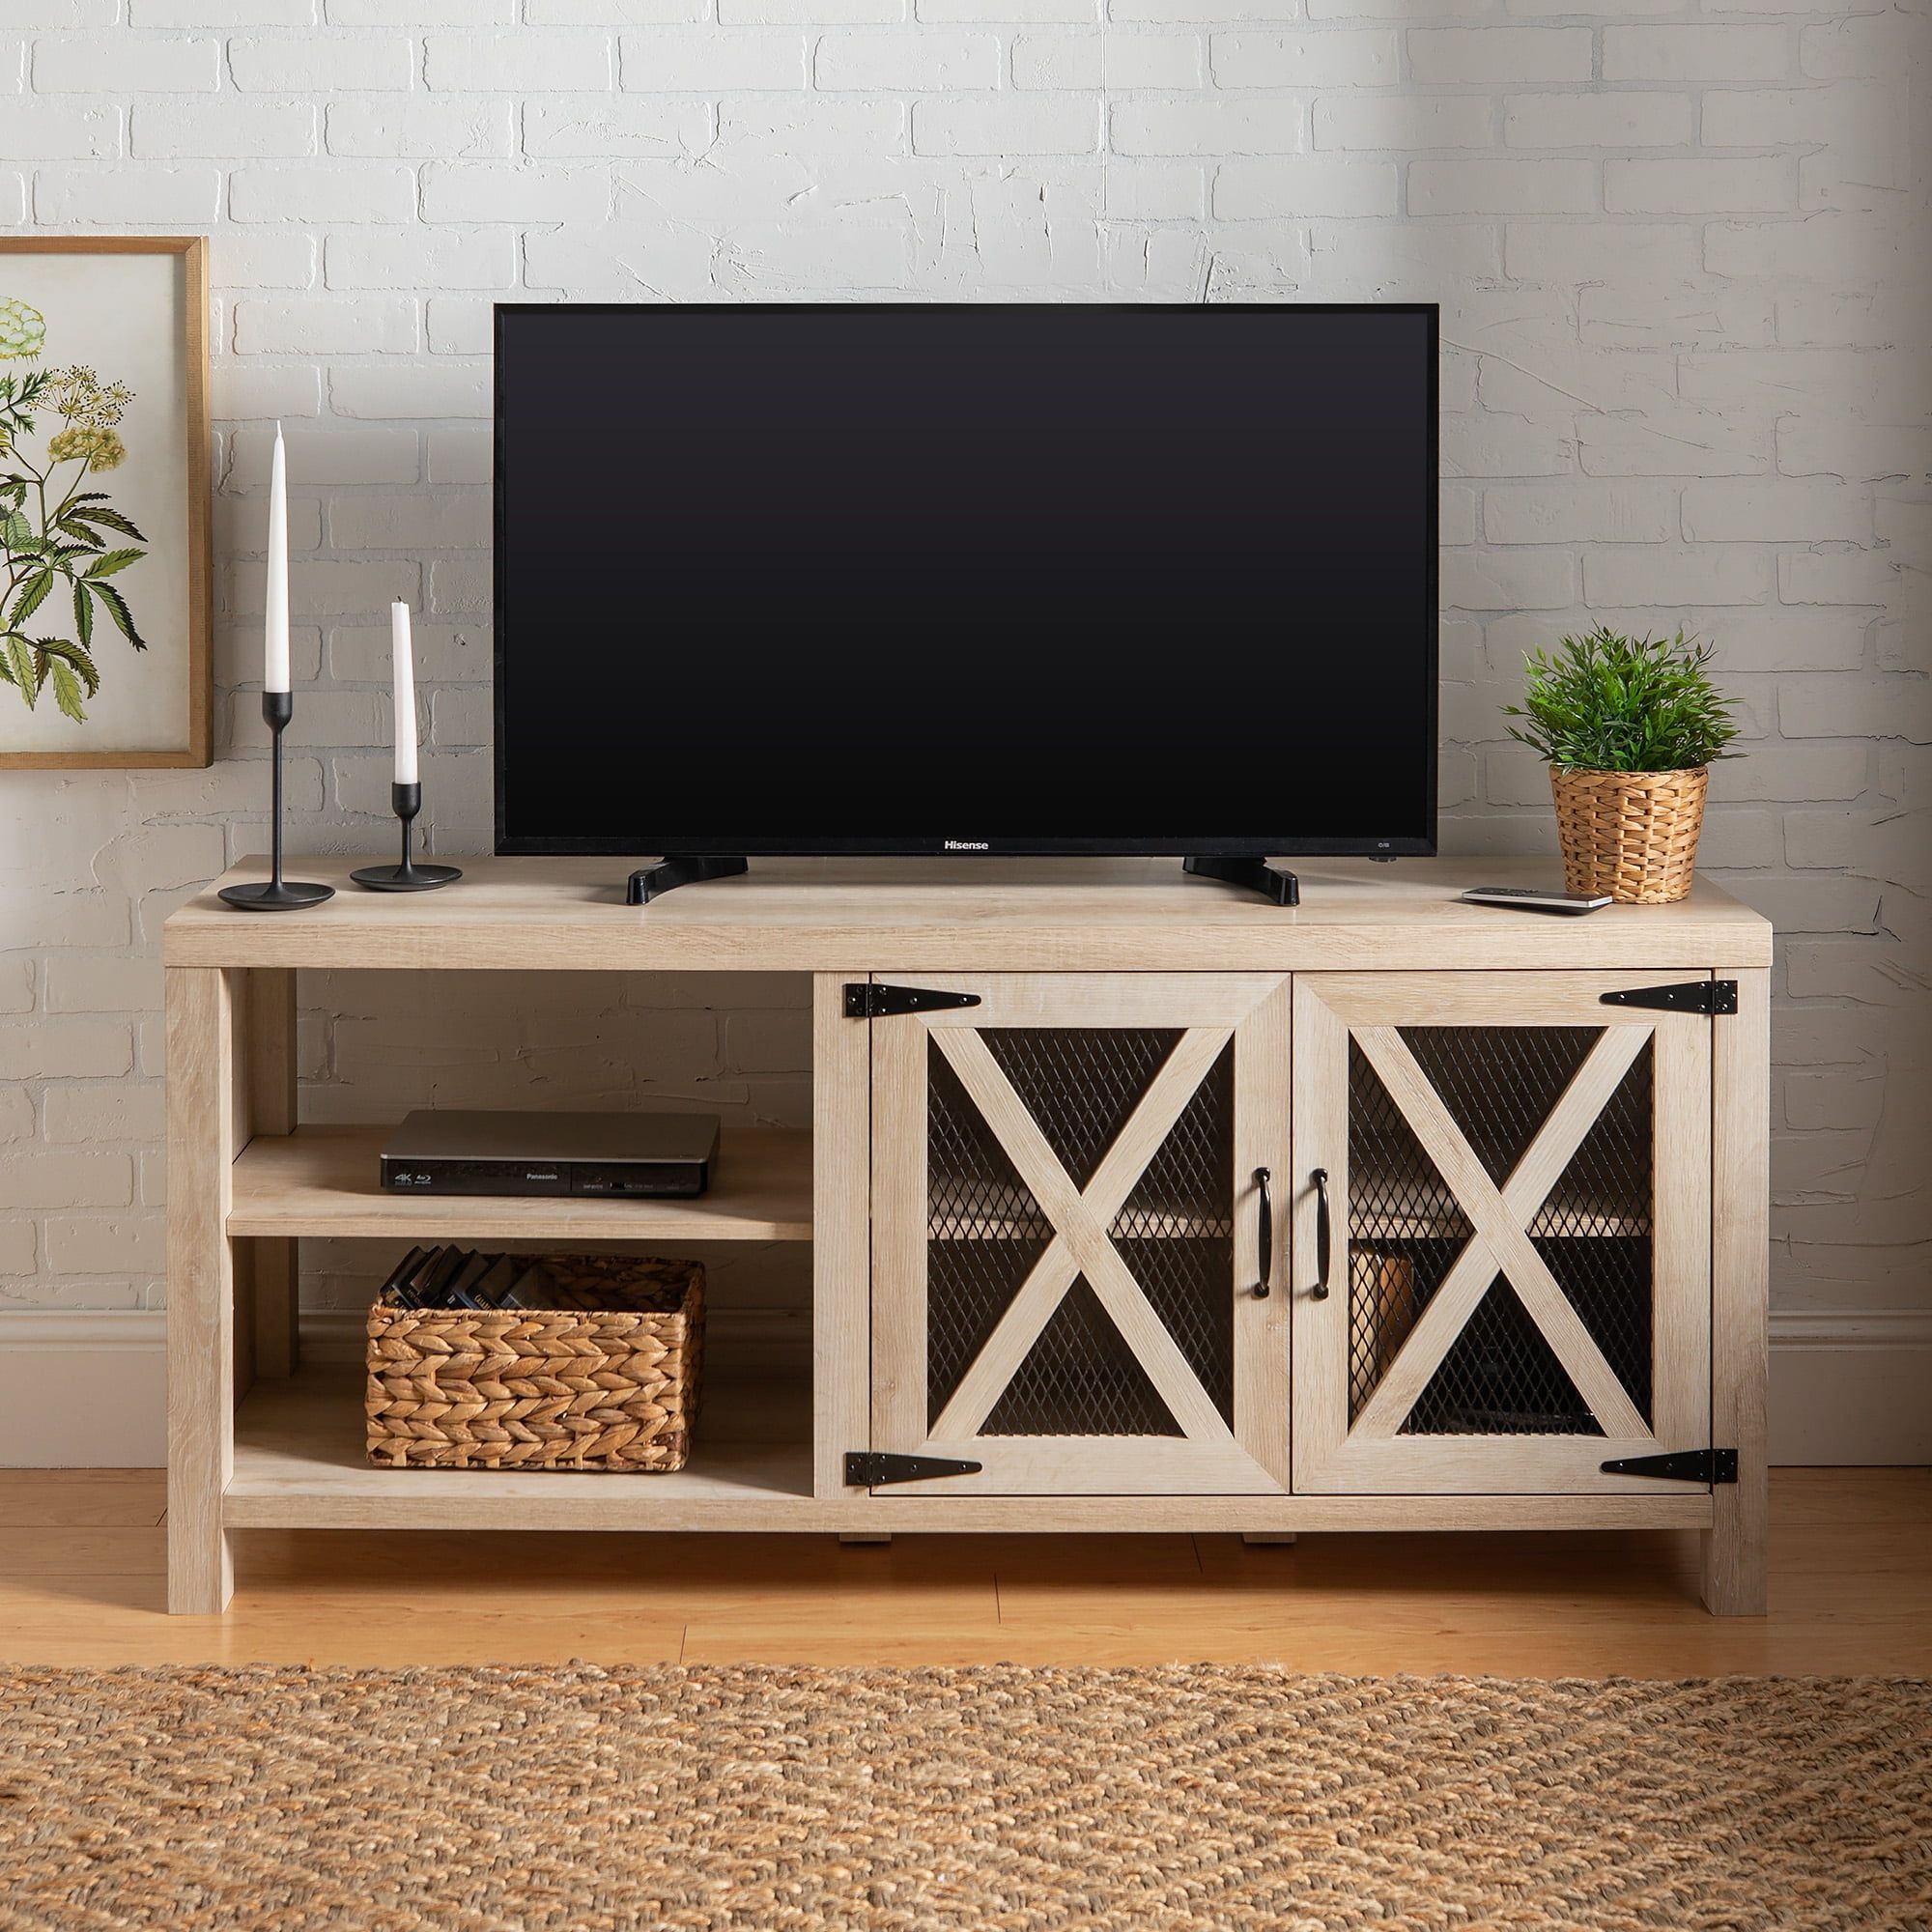 Manor Park Industrial Farmhouse Tv Stand For Tvs Up To 64" – White Oak For Farmhouse Stands For Tvs (View 3 of 20)